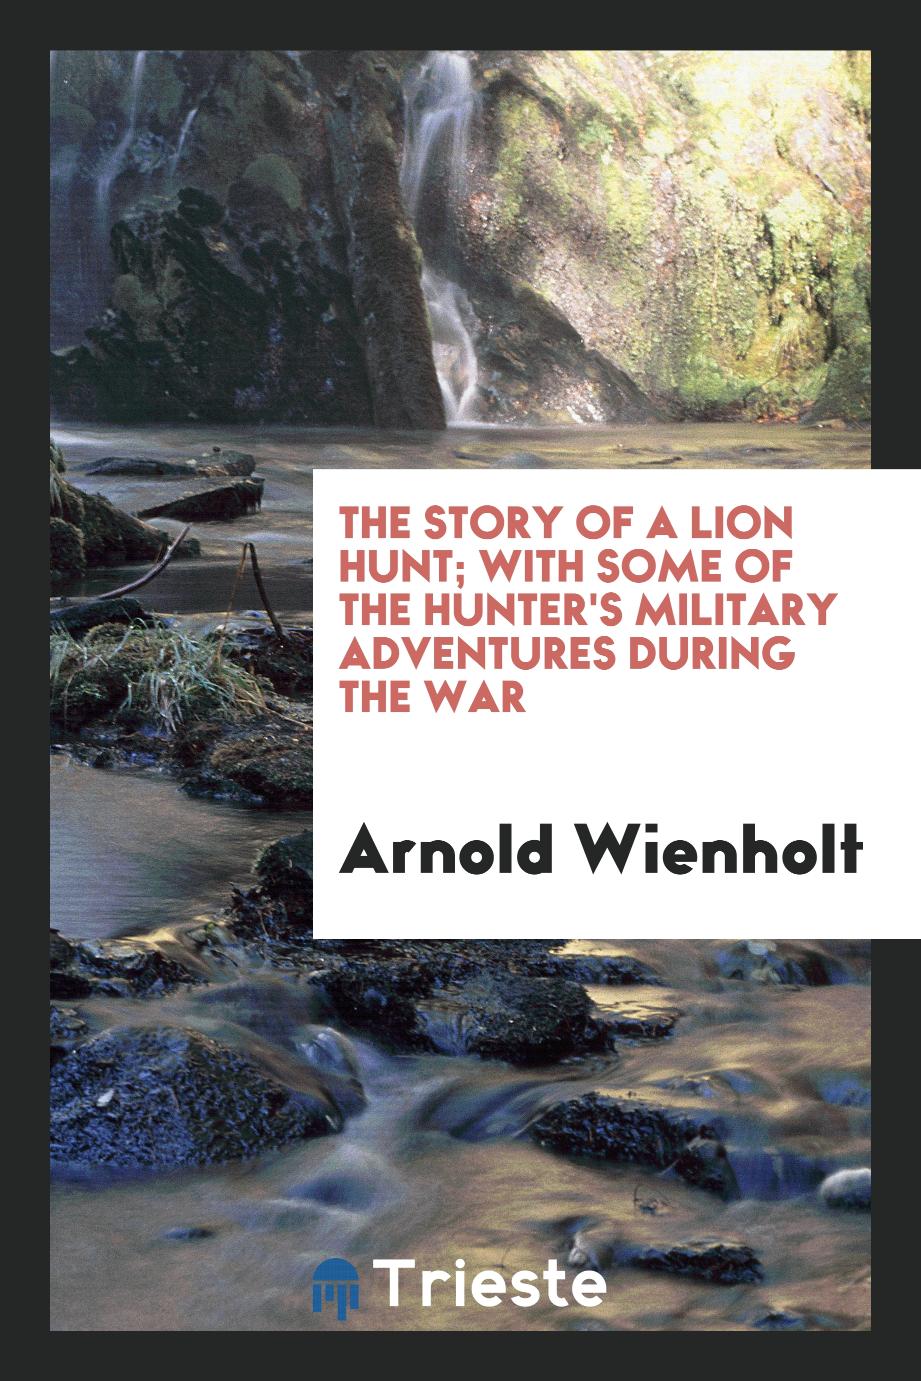 The story of a lion hunt; with some of the hunter's military adventures during the war